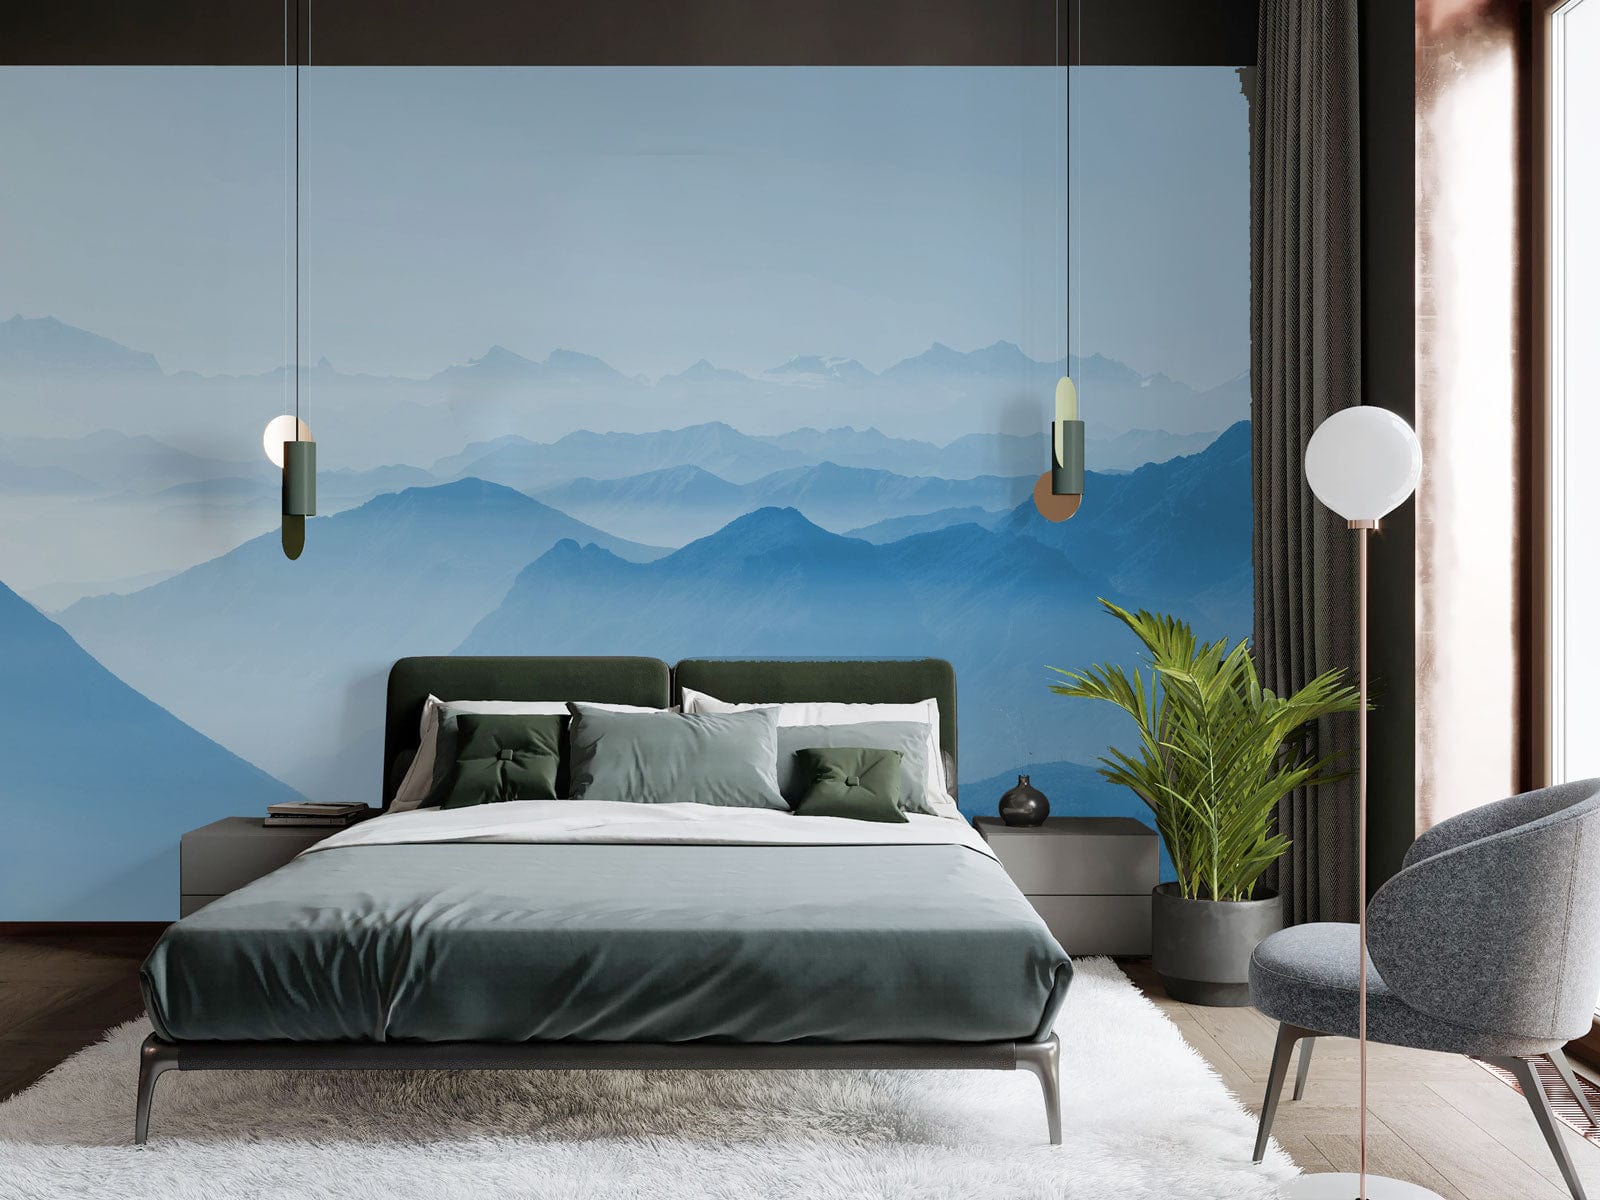 Wallpaper mural for bedroom decoration featuring misty mountains in the distance.